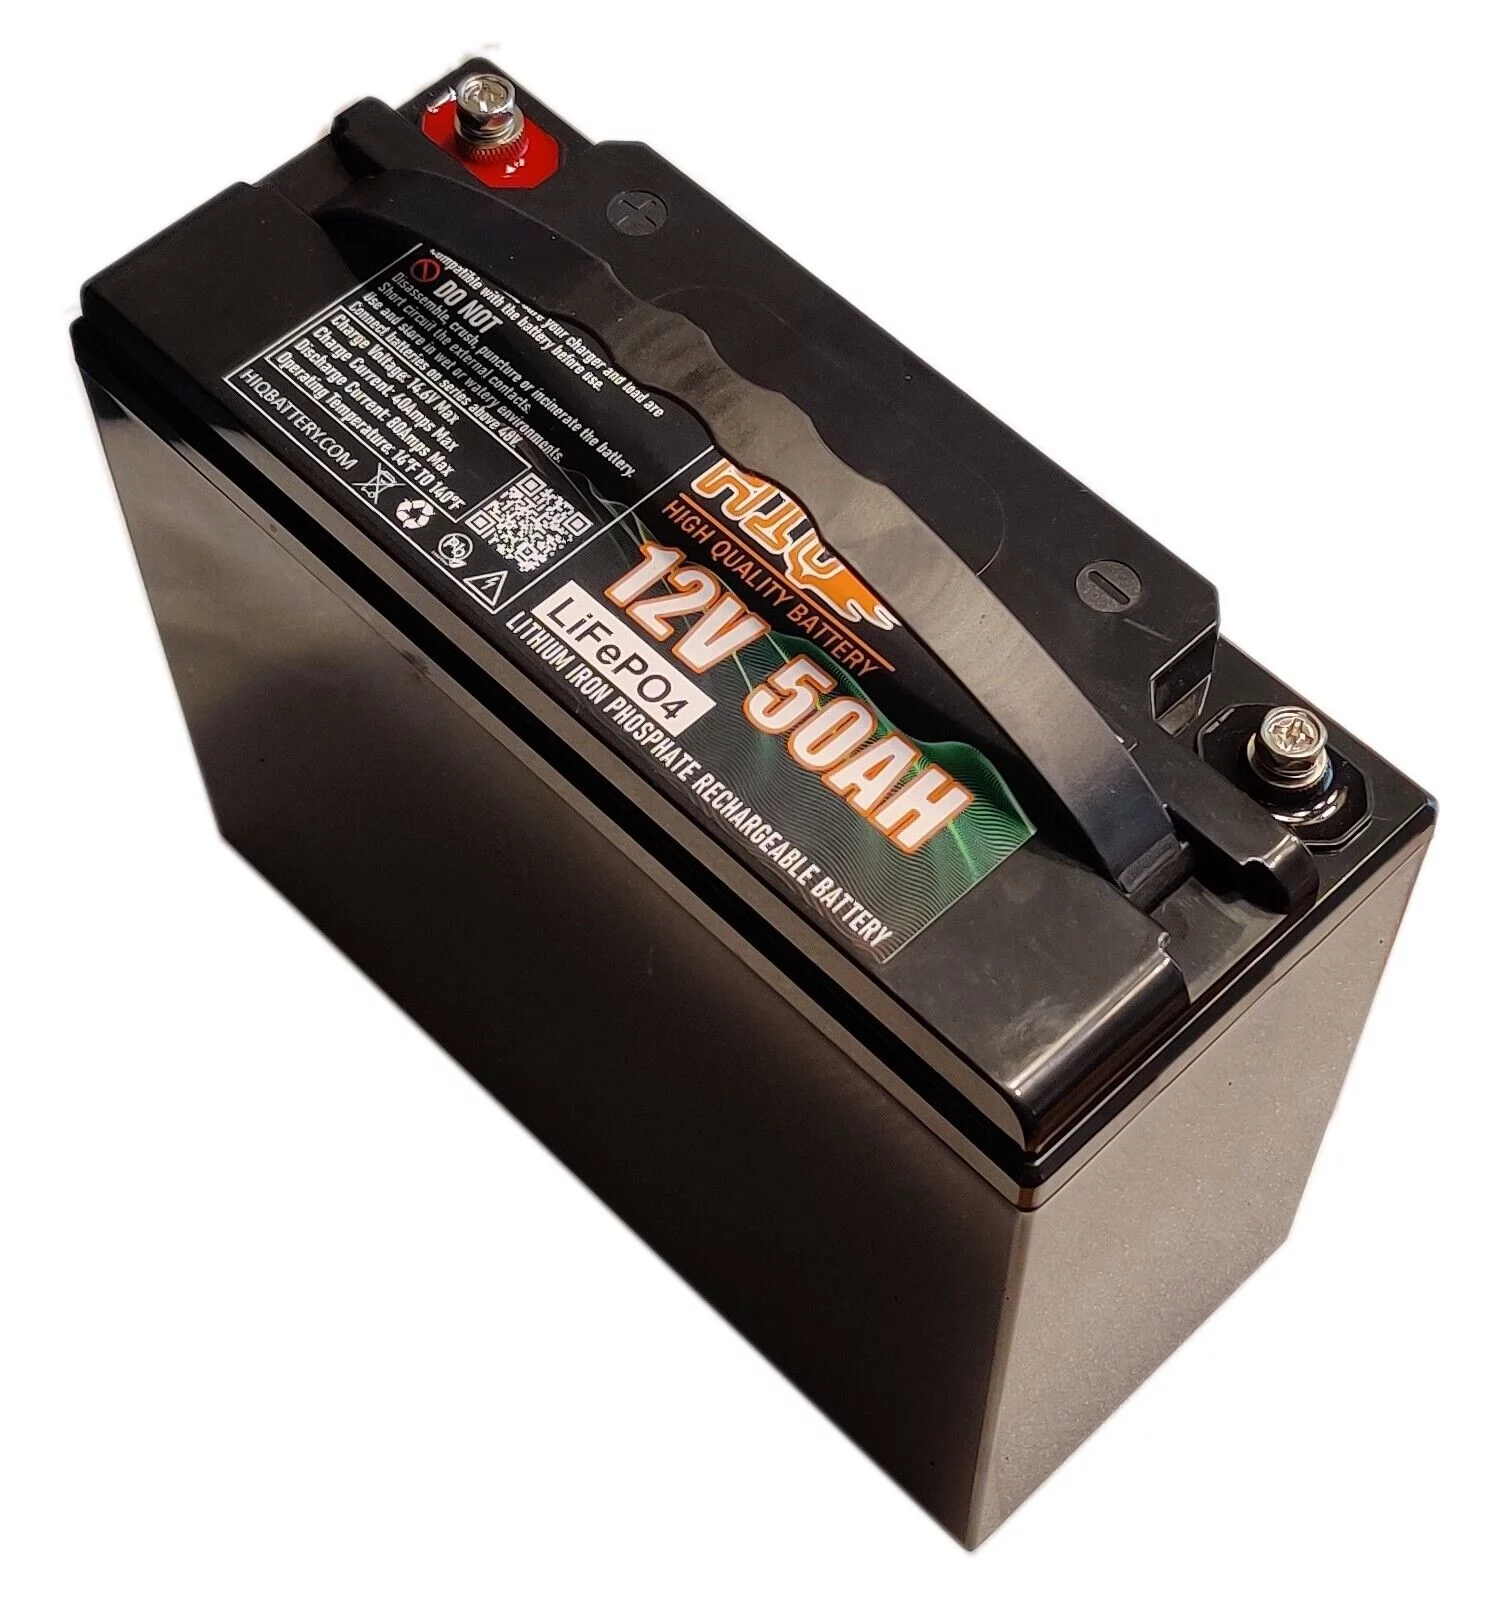 12V50Ah Lithium LiFePO4 Battery Rechargeable Batterie Active Balancer